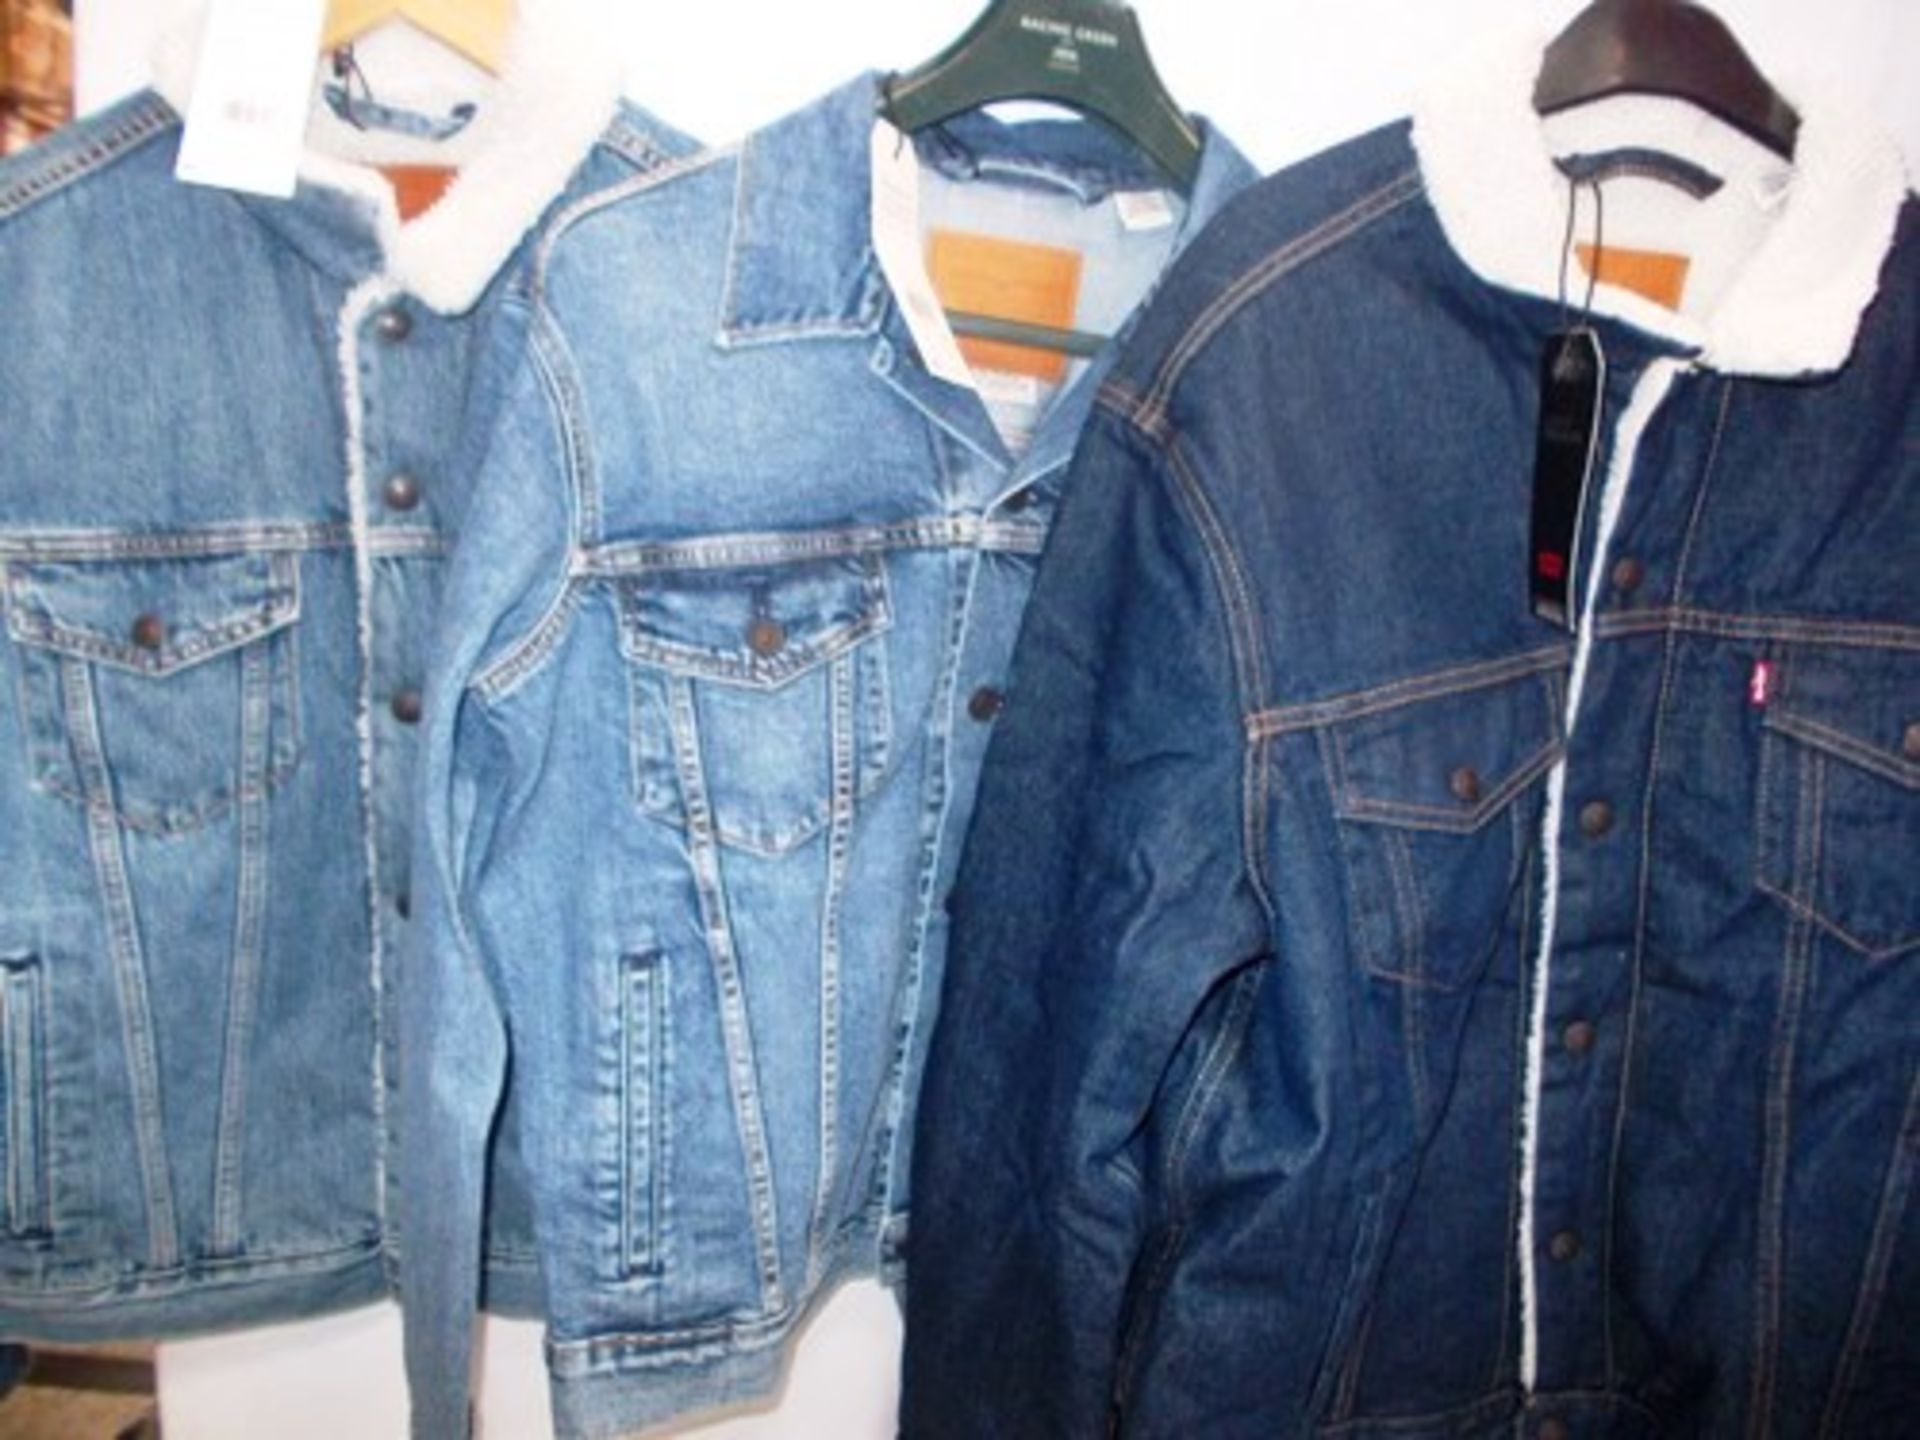 3 x Levi jackets, 2 x size S and 1 x size XL - New with tags (E1B)